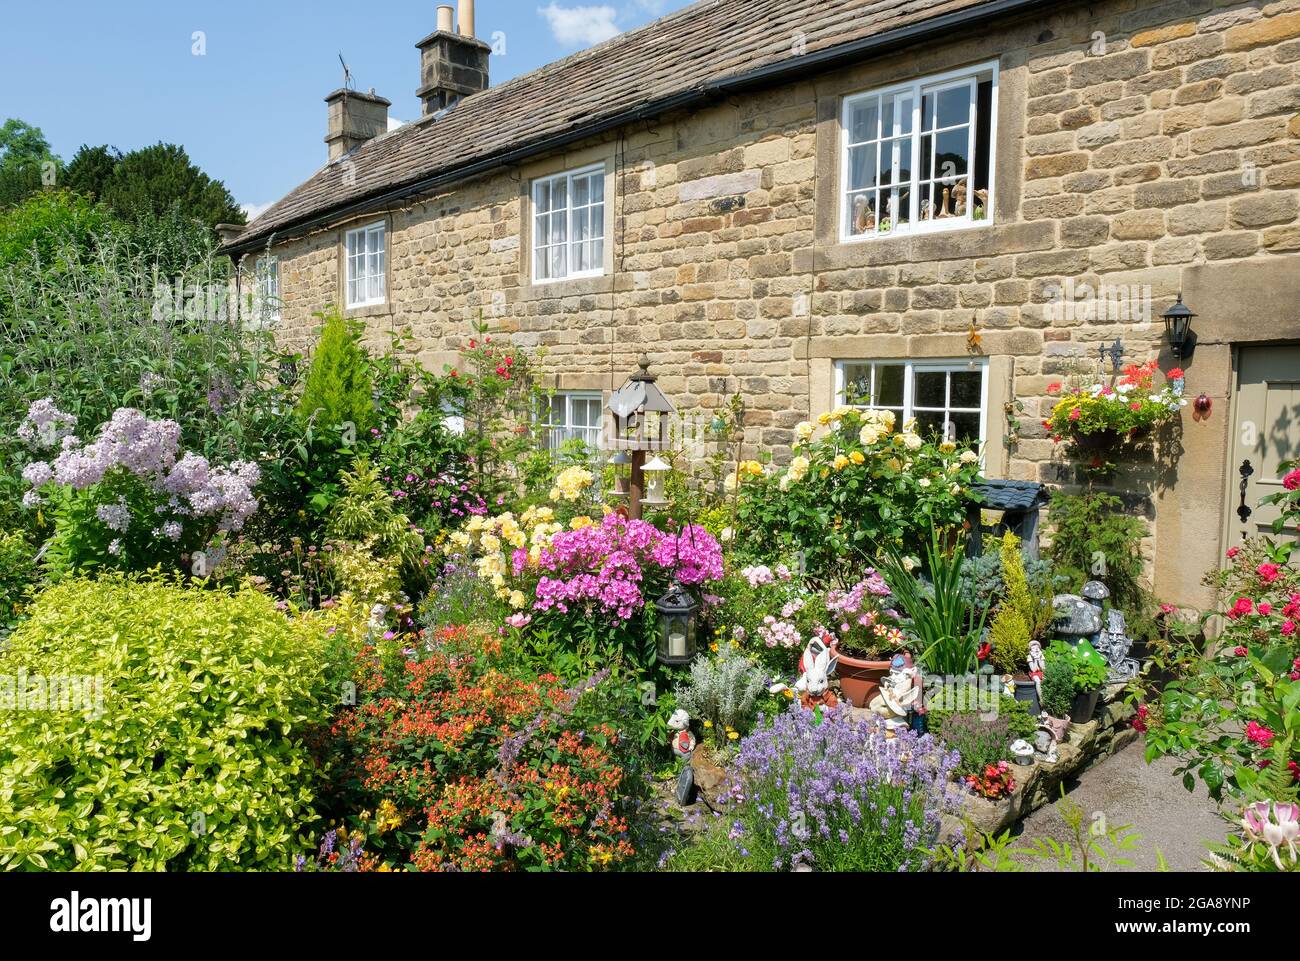 A cottage garden in the Derbyshire plague village of Eyam. Colourful flowers stand against stone built walling. Stock Photo